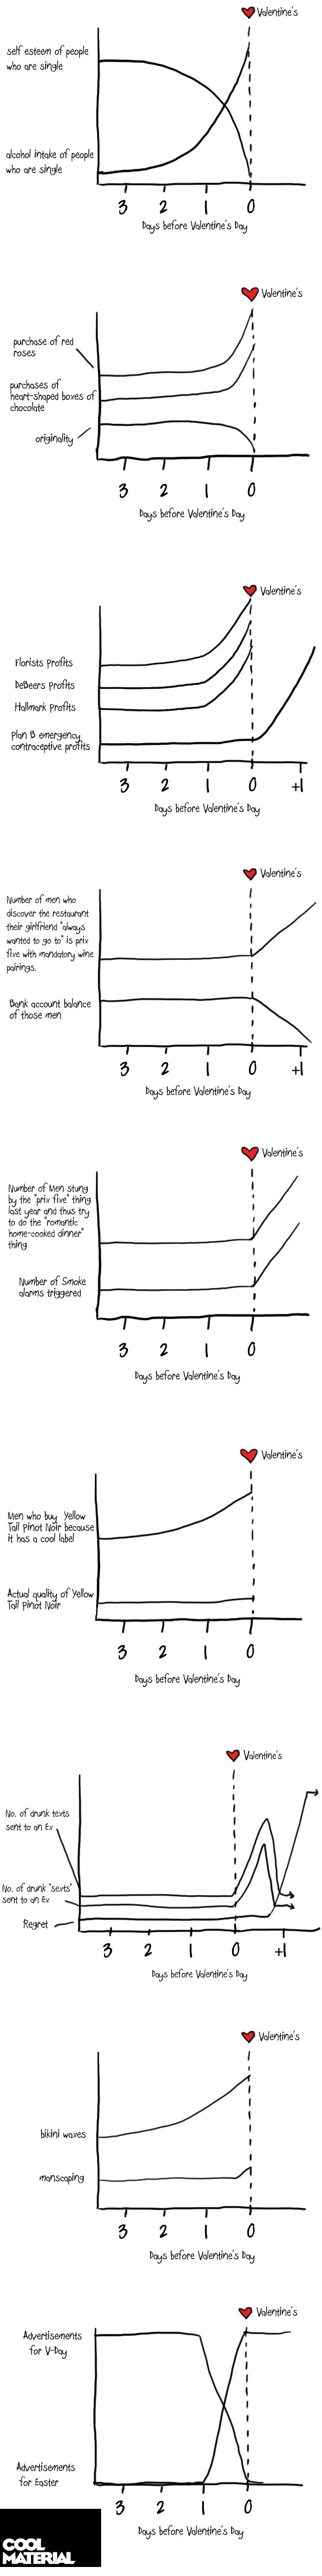 This Just About Sums Up Valentine's Day.